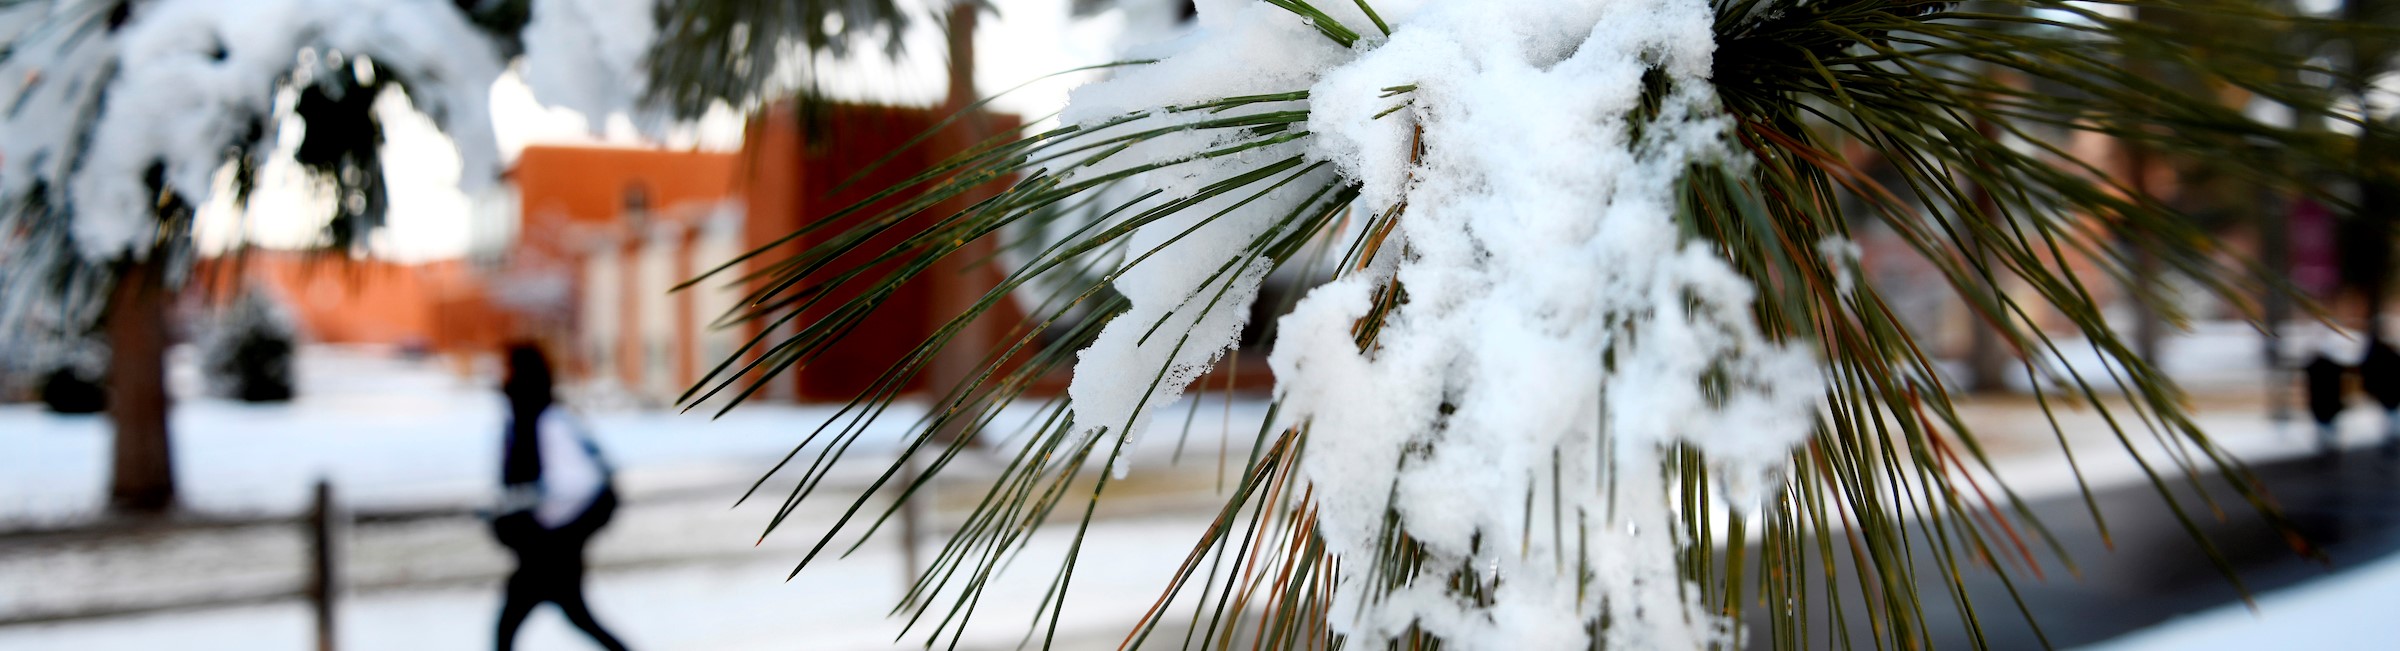 pine tree branch with snow